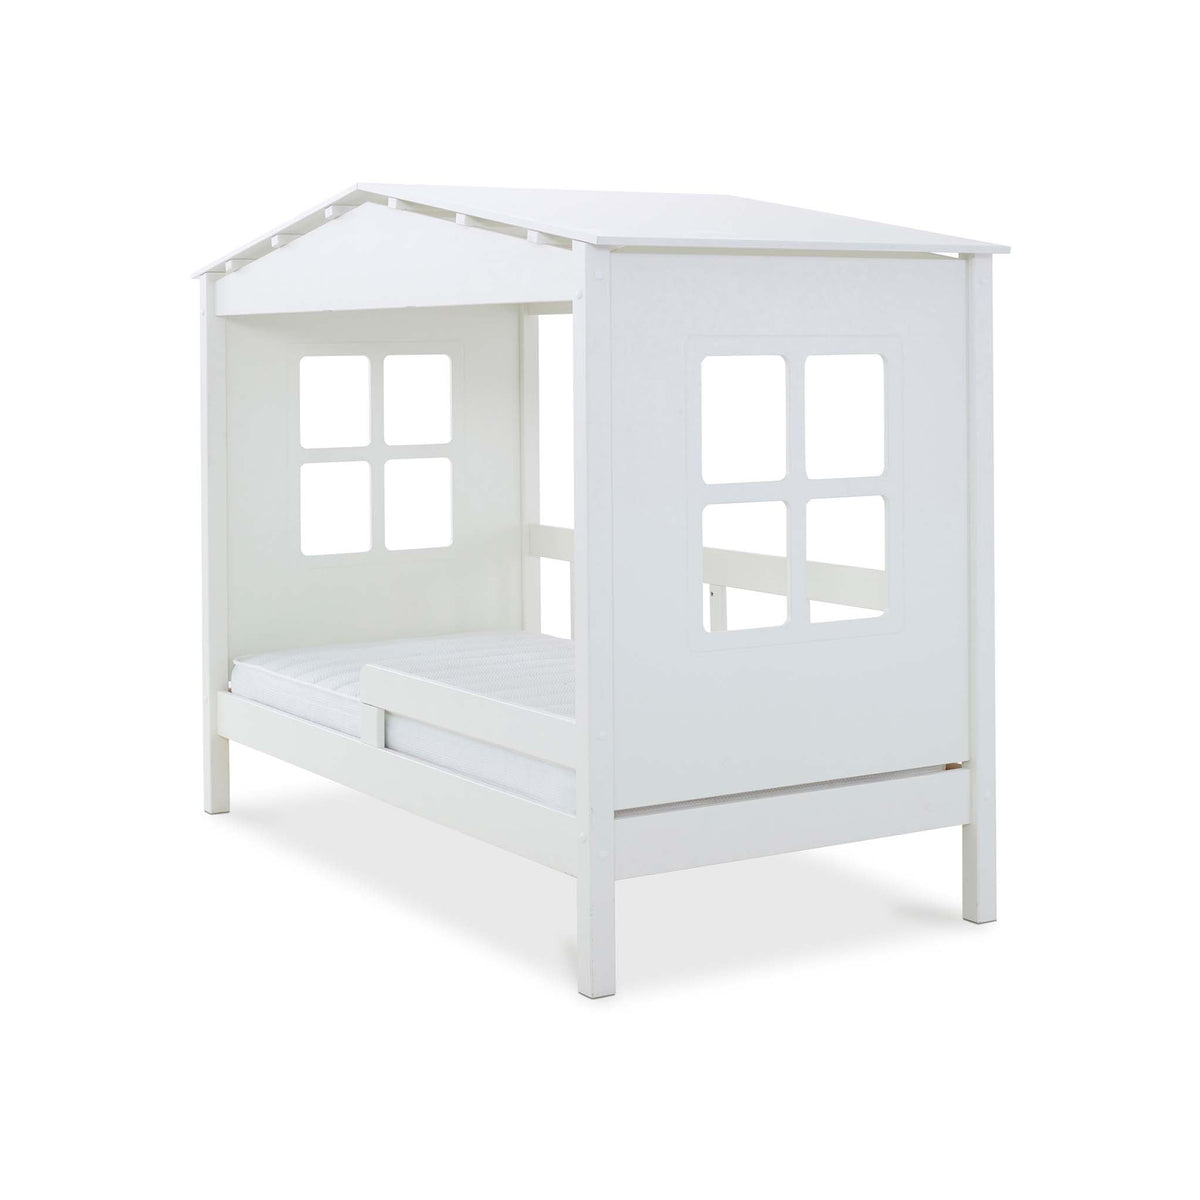 side view of the Childrens White Hideout Bed